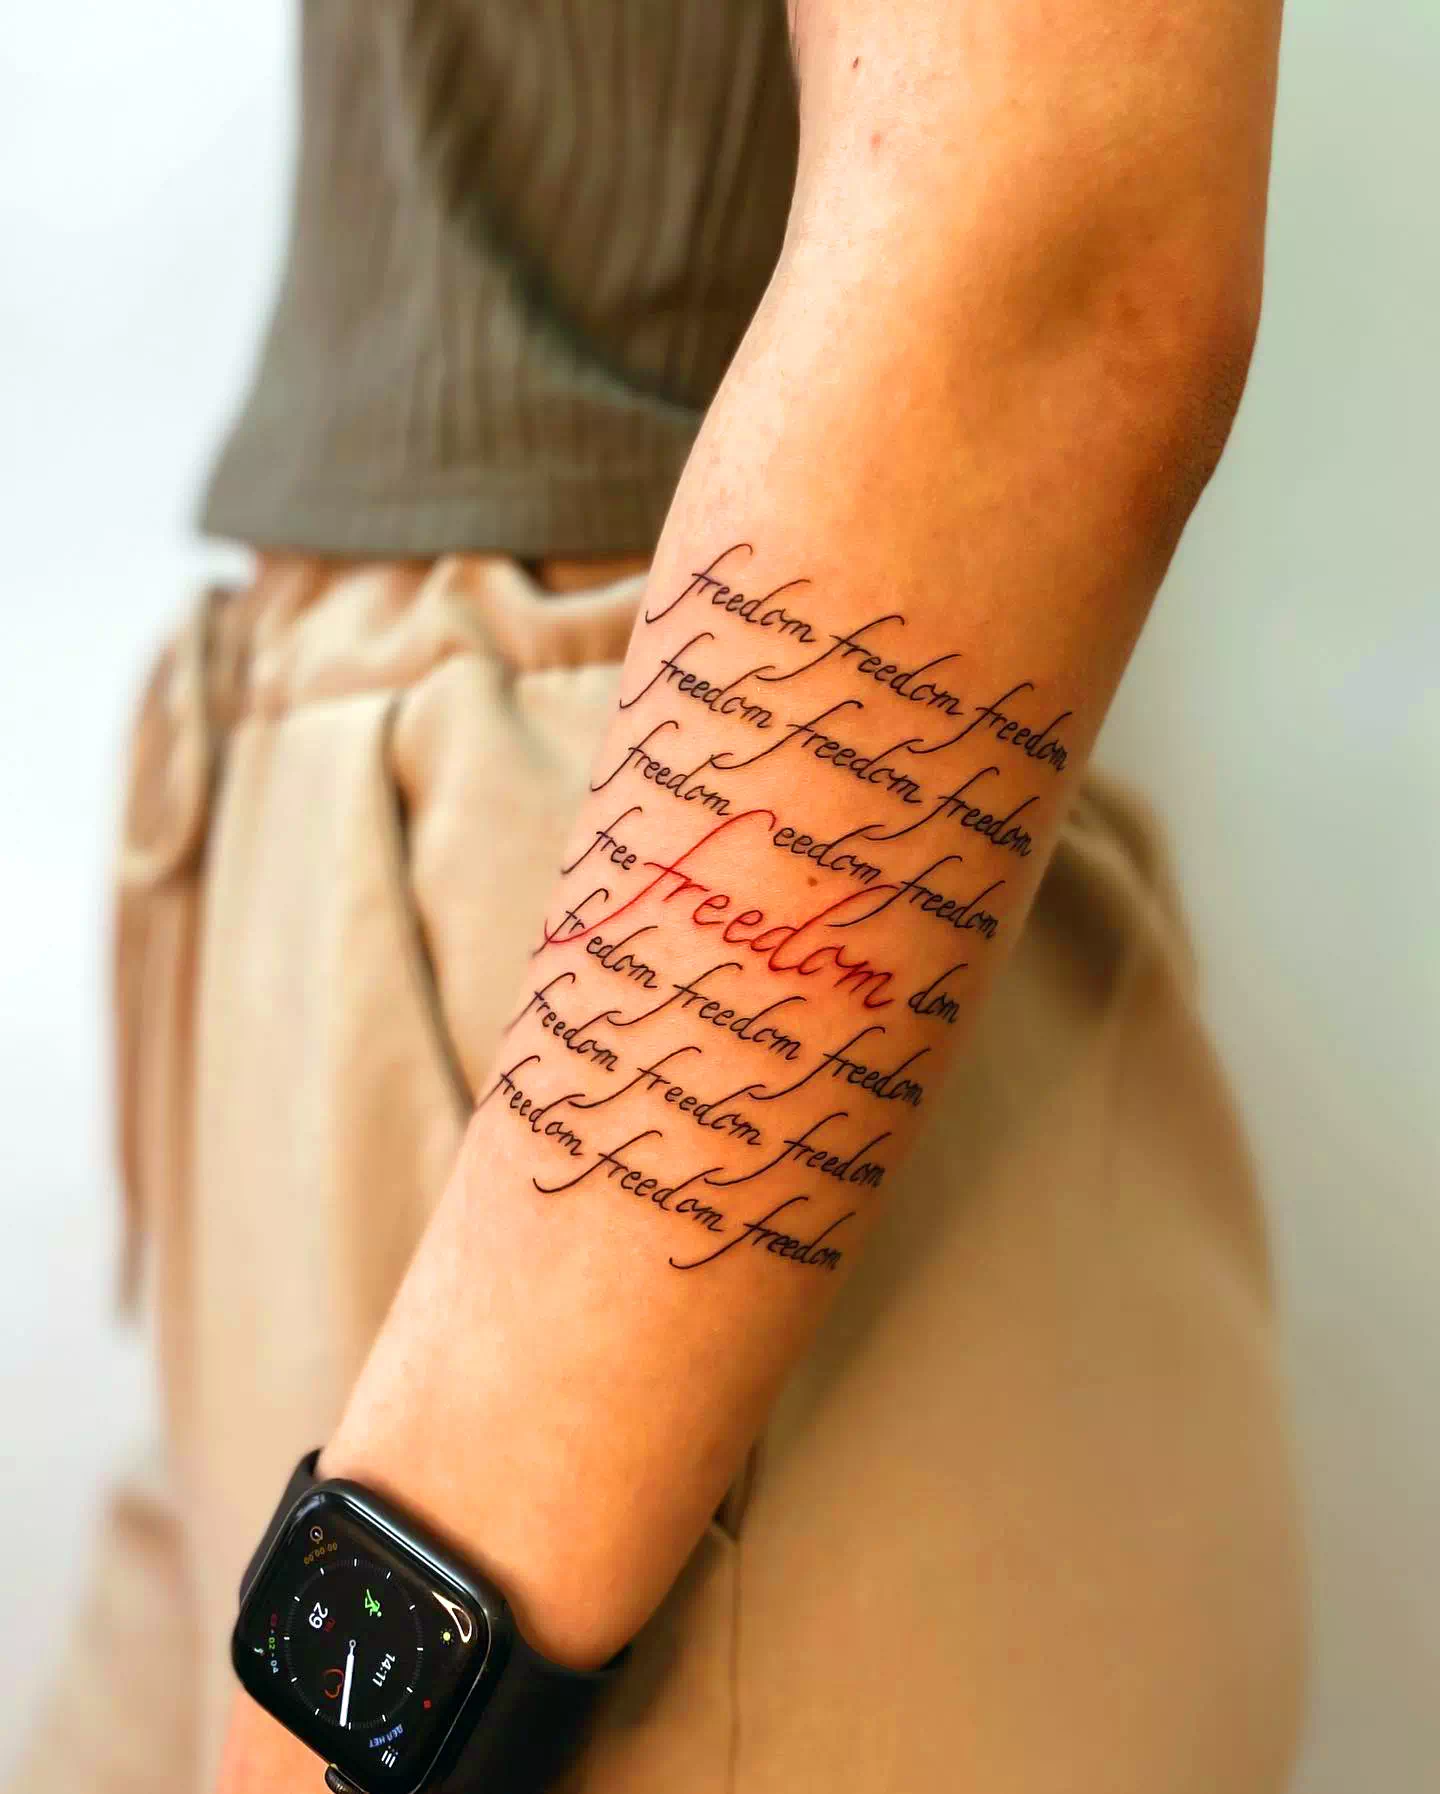 Words and Phrases Tattoos 1